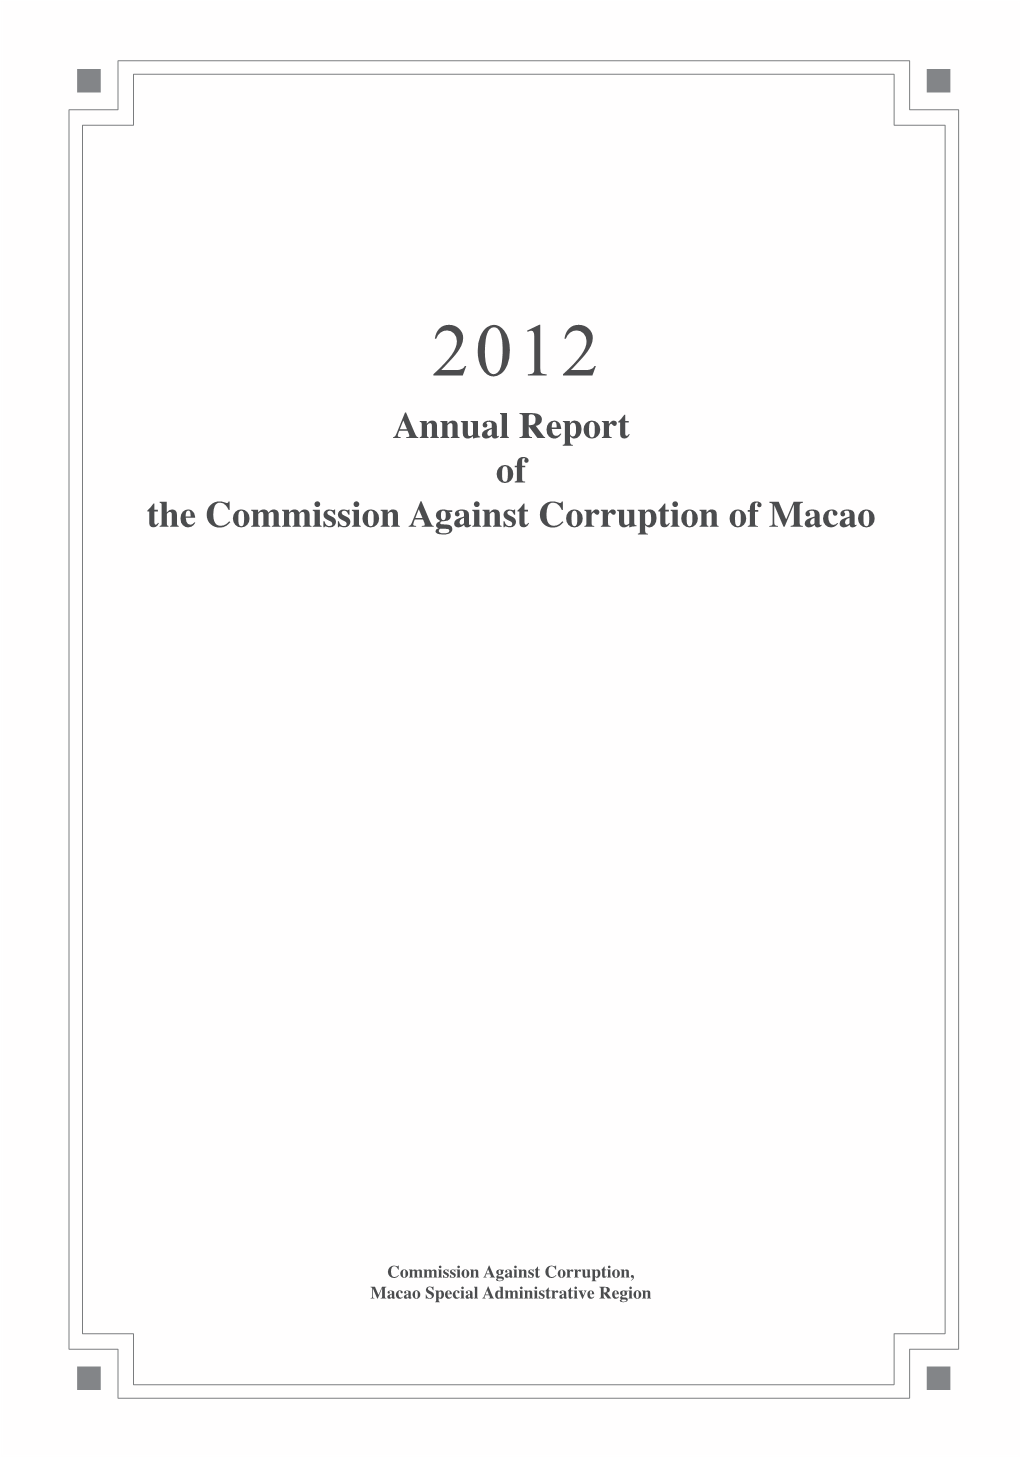 Annual Report of the CCAC of Macao